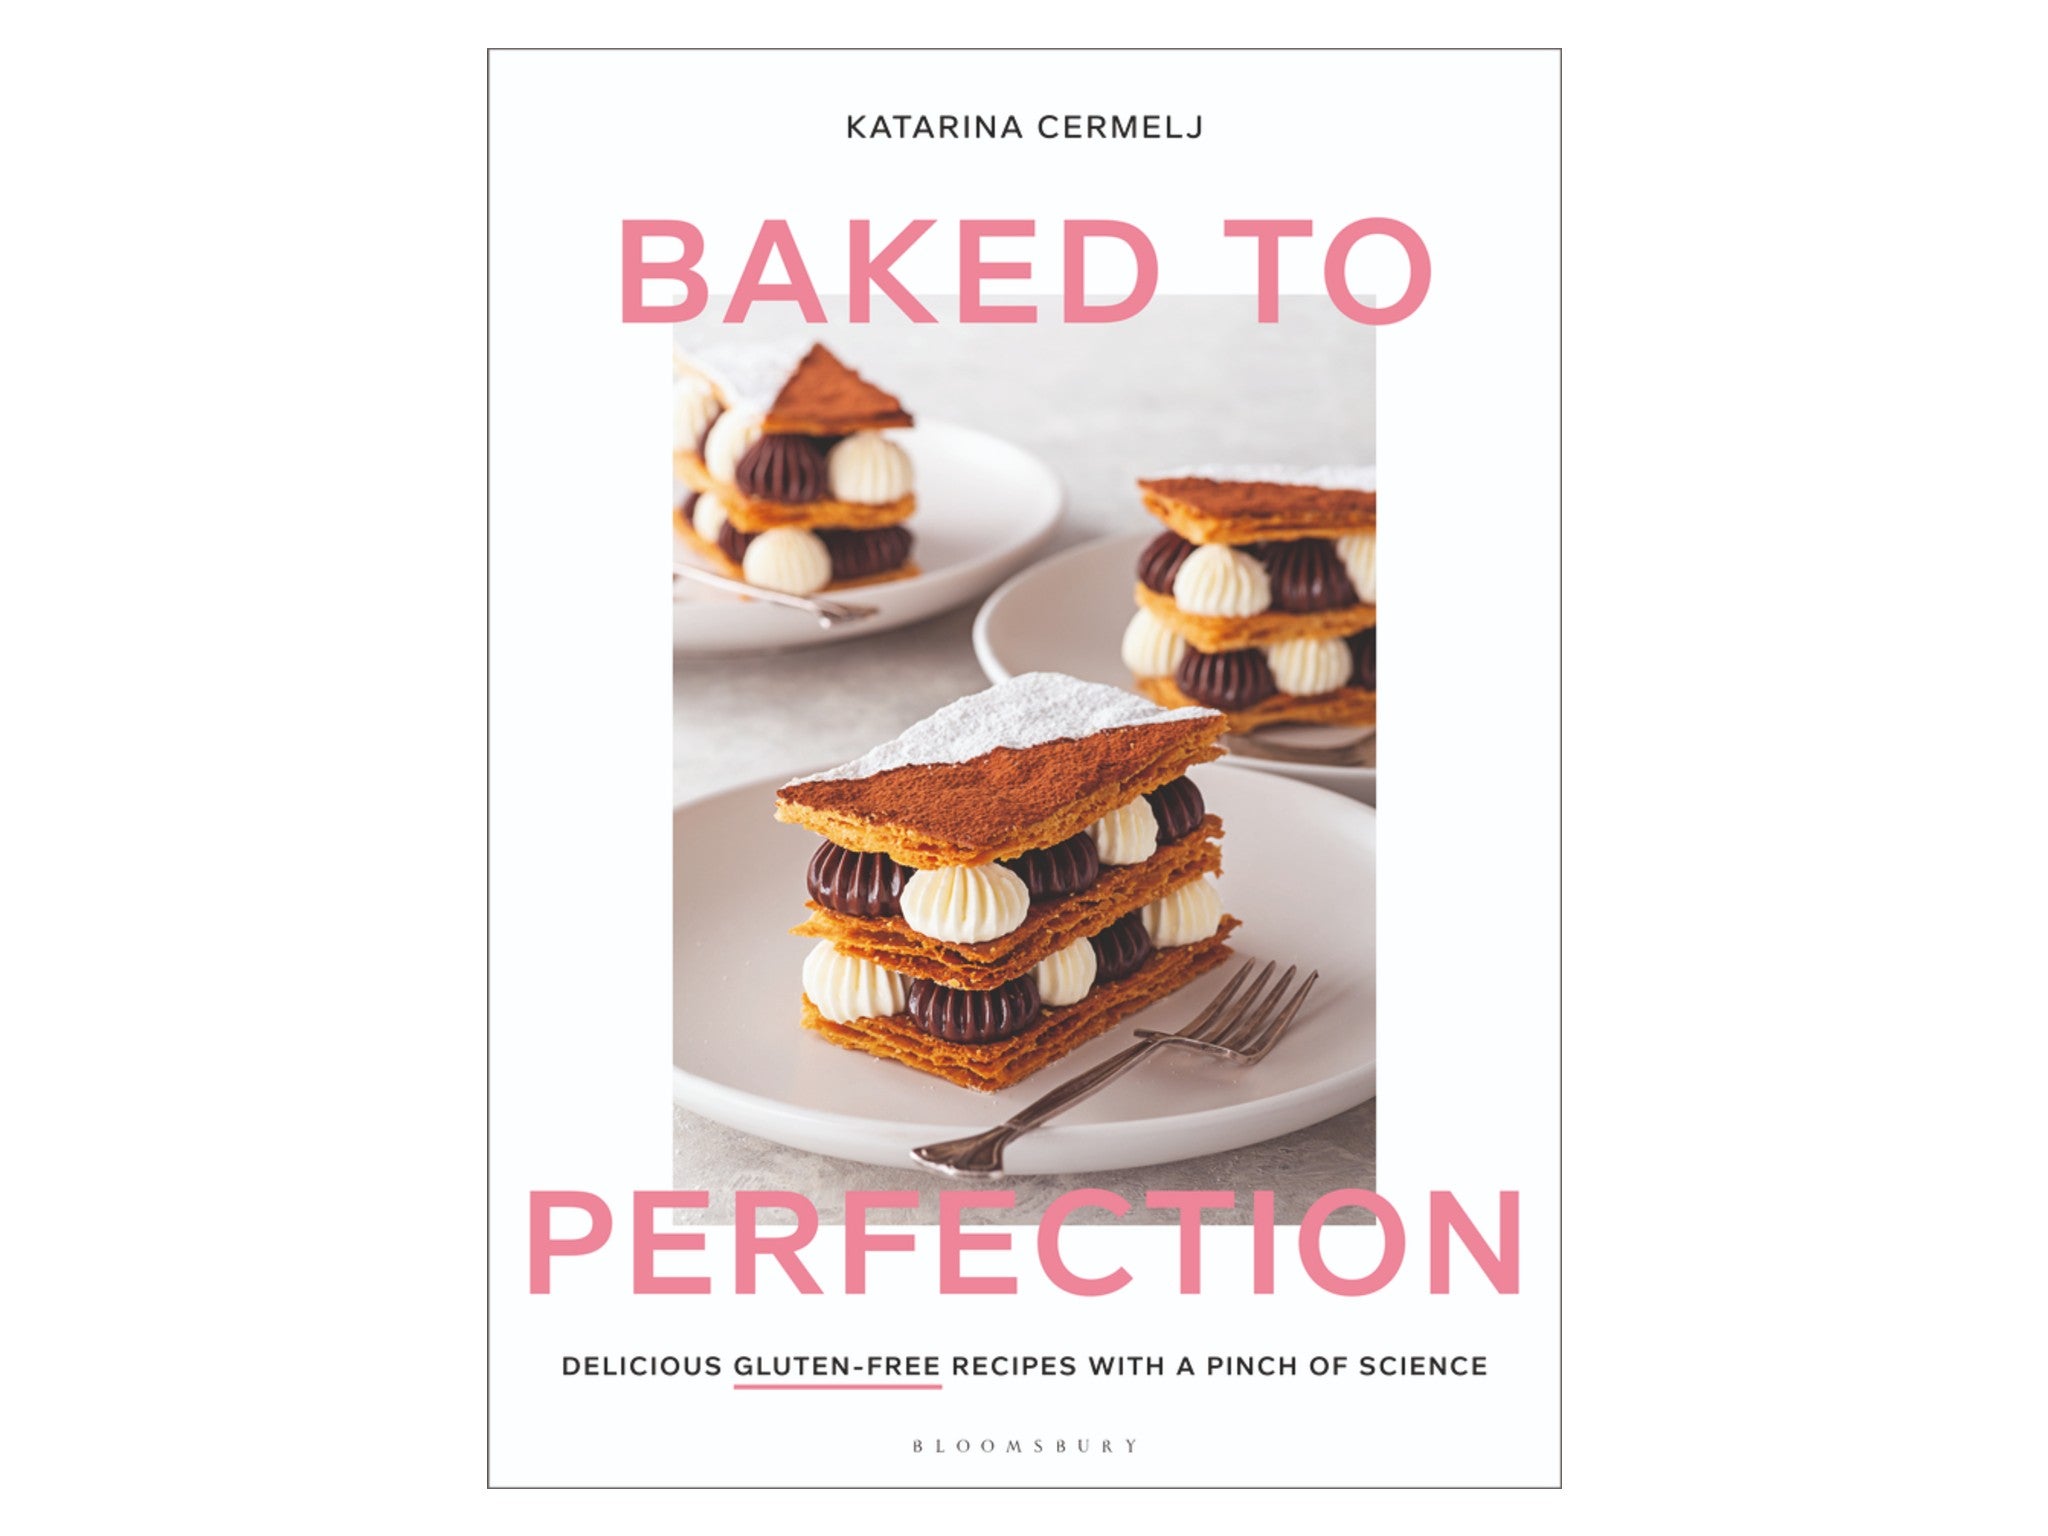 ‘Baked to Perfection’ by Katarina Cermelj, published by Bloomsbury Absolute indybest.jpeg